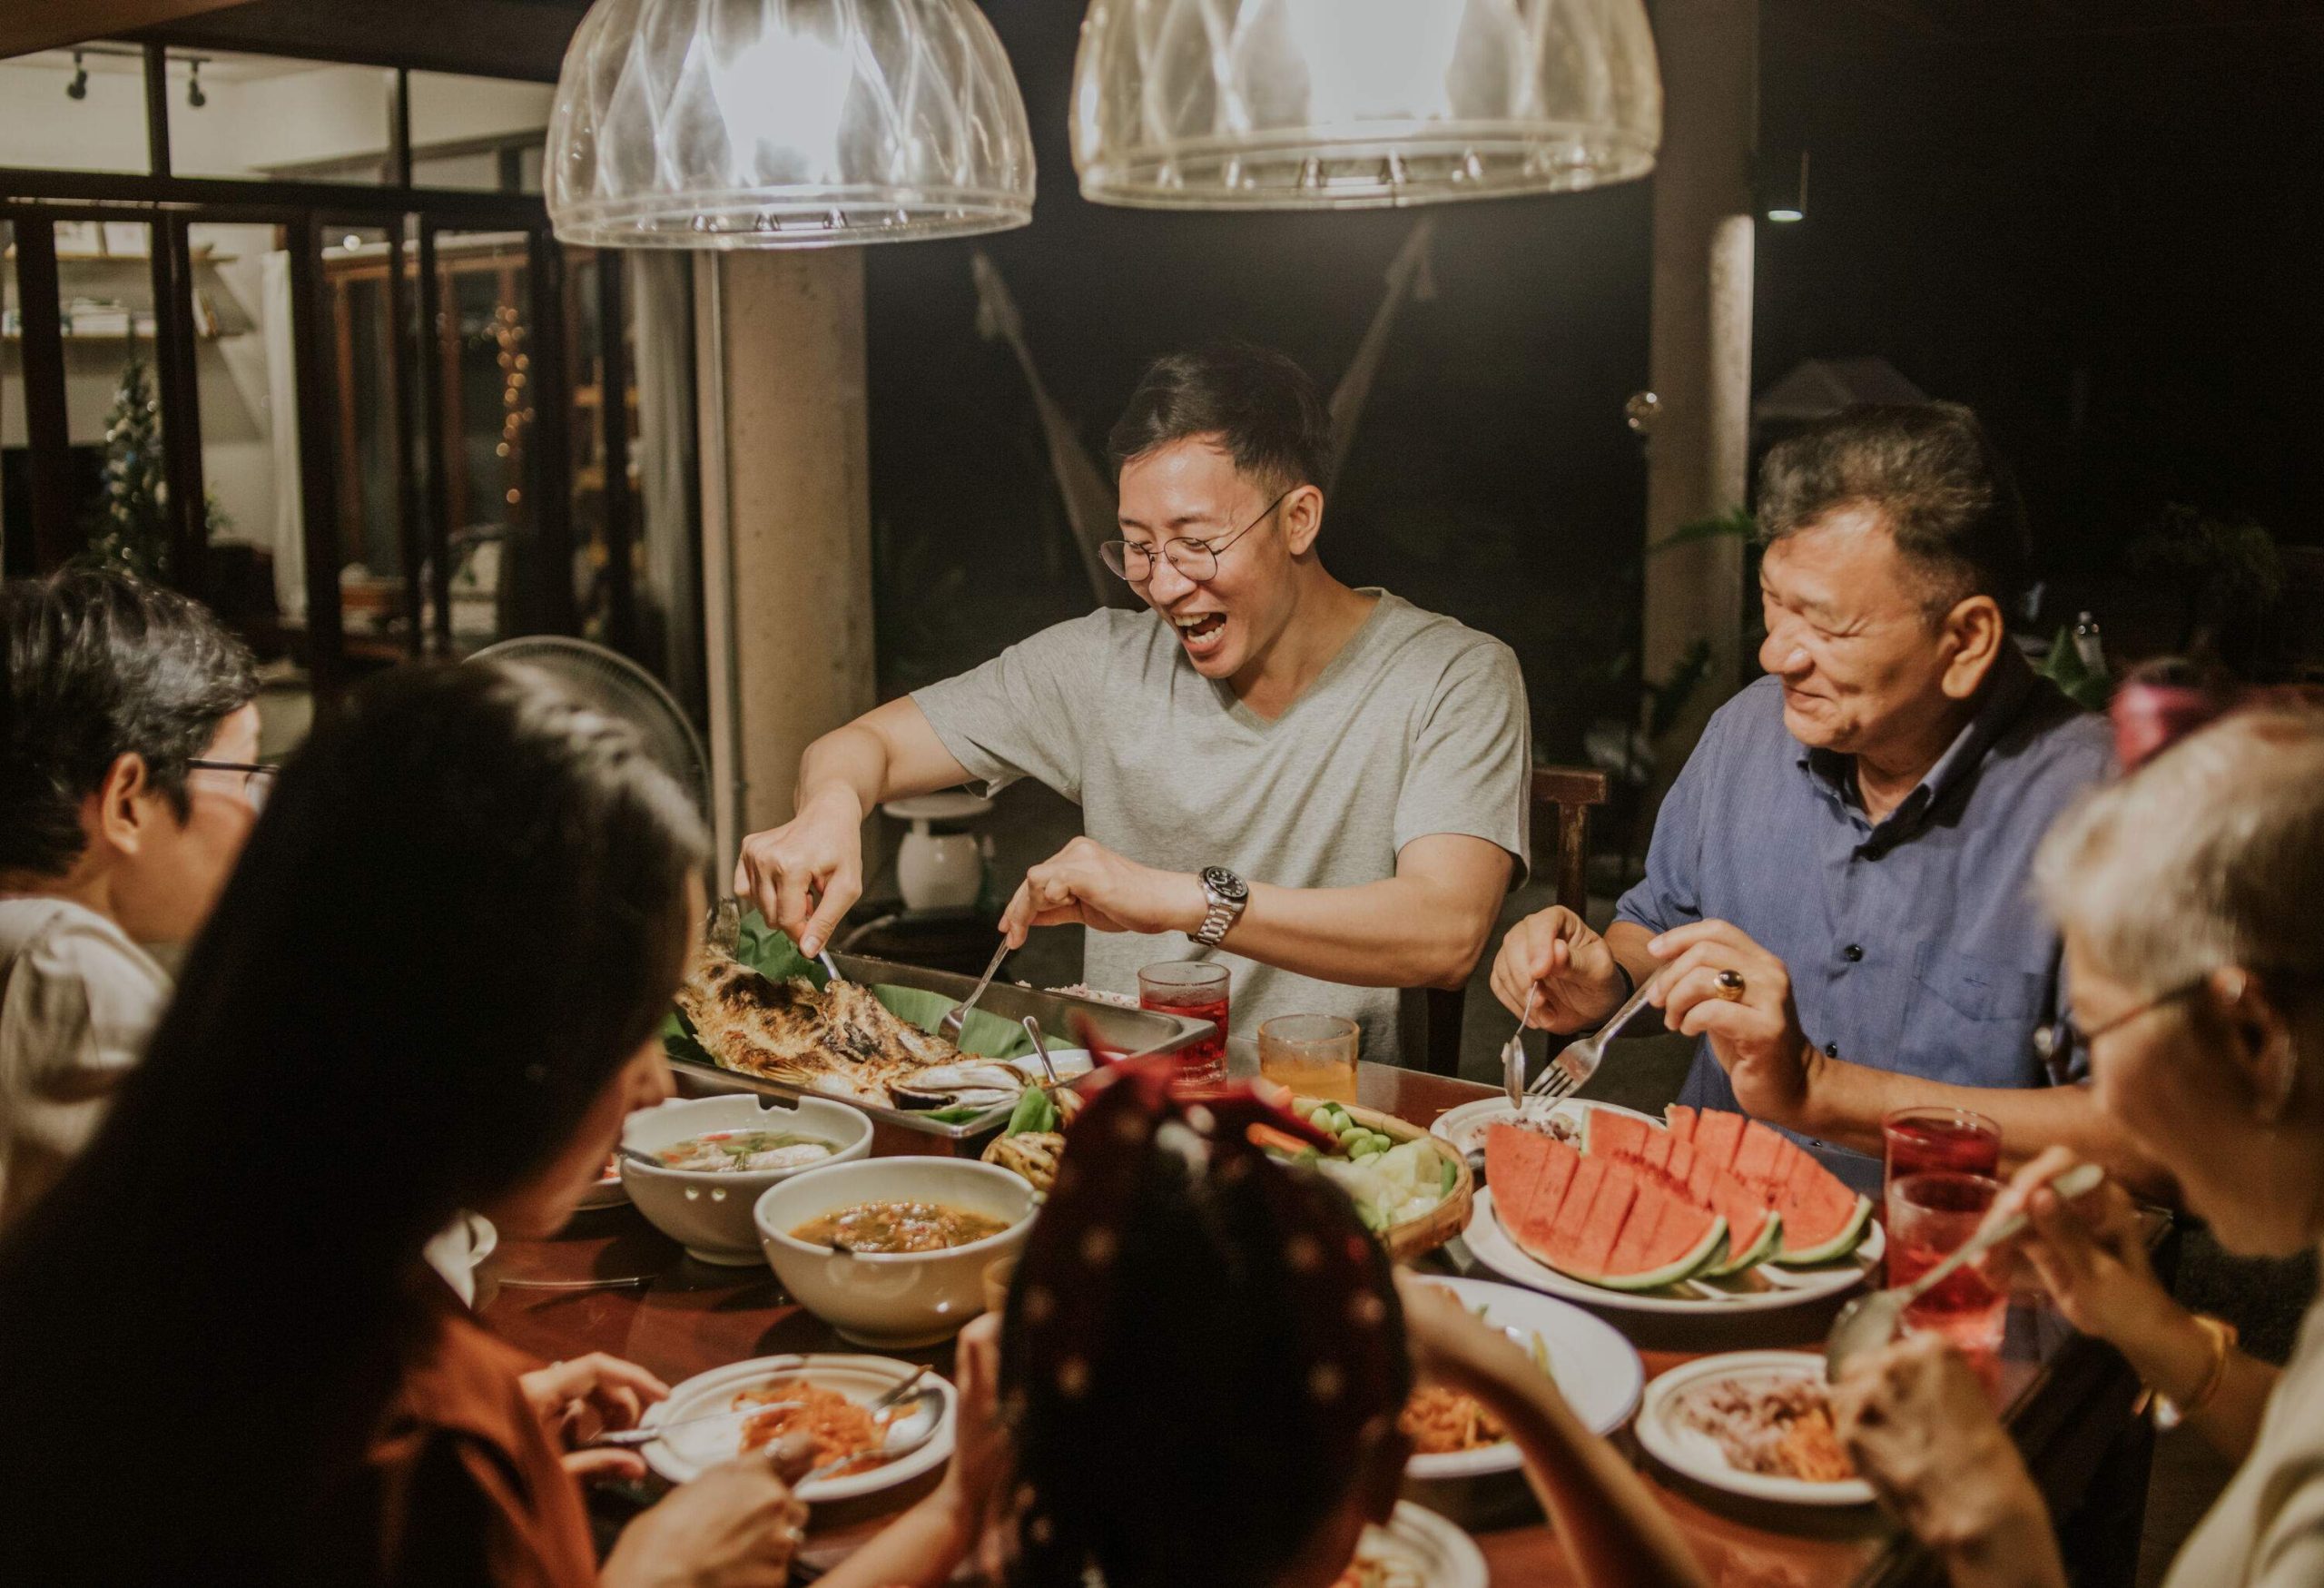 A family happily dining around a table full of food.